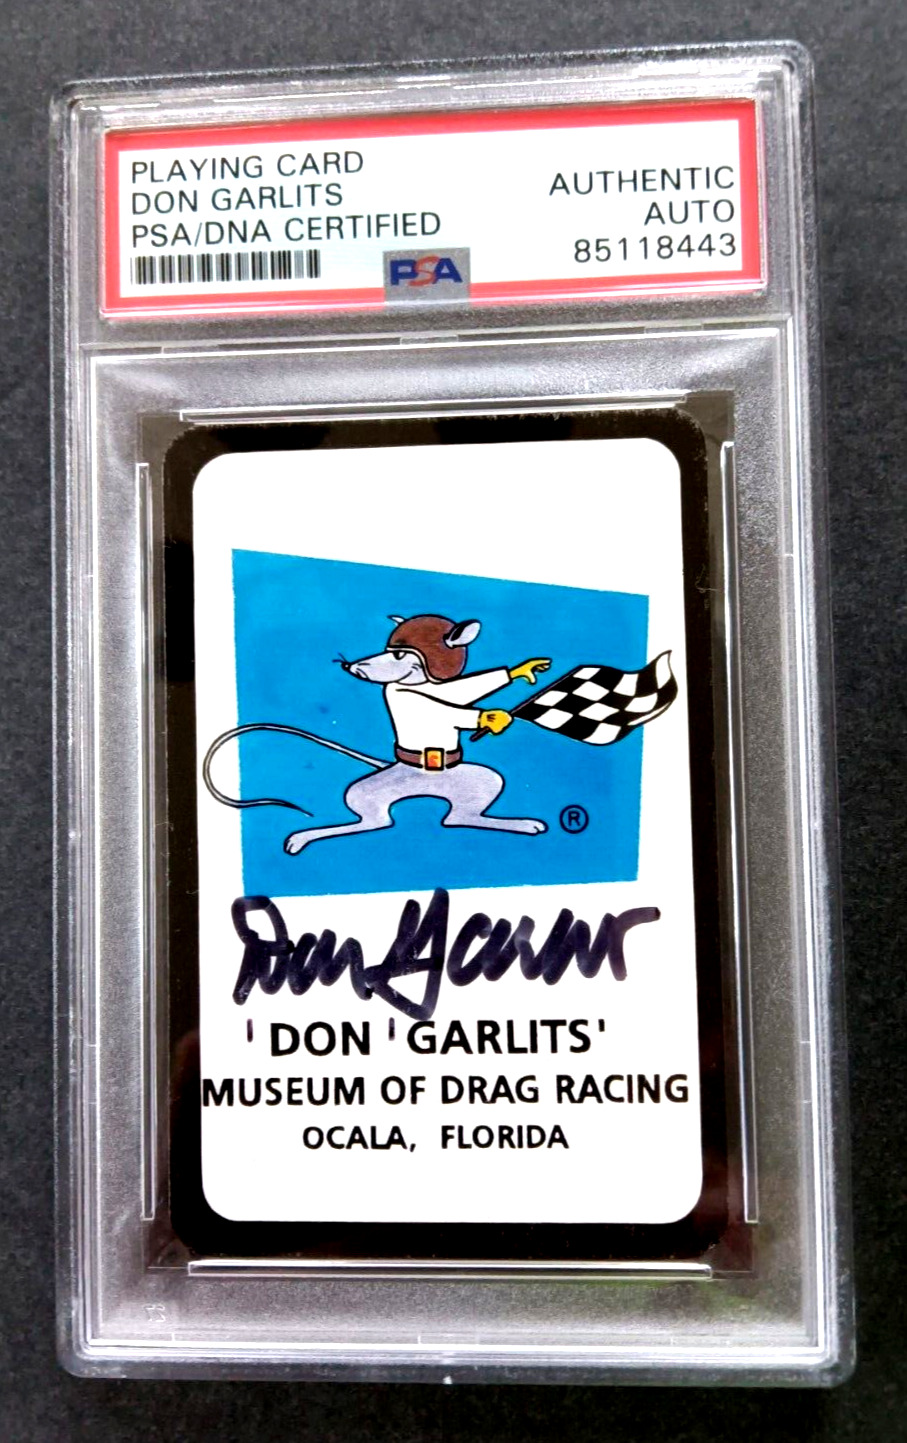 Don Garlits Autographed Playing Card Authenticated and Encapsulated by PSA / DNA